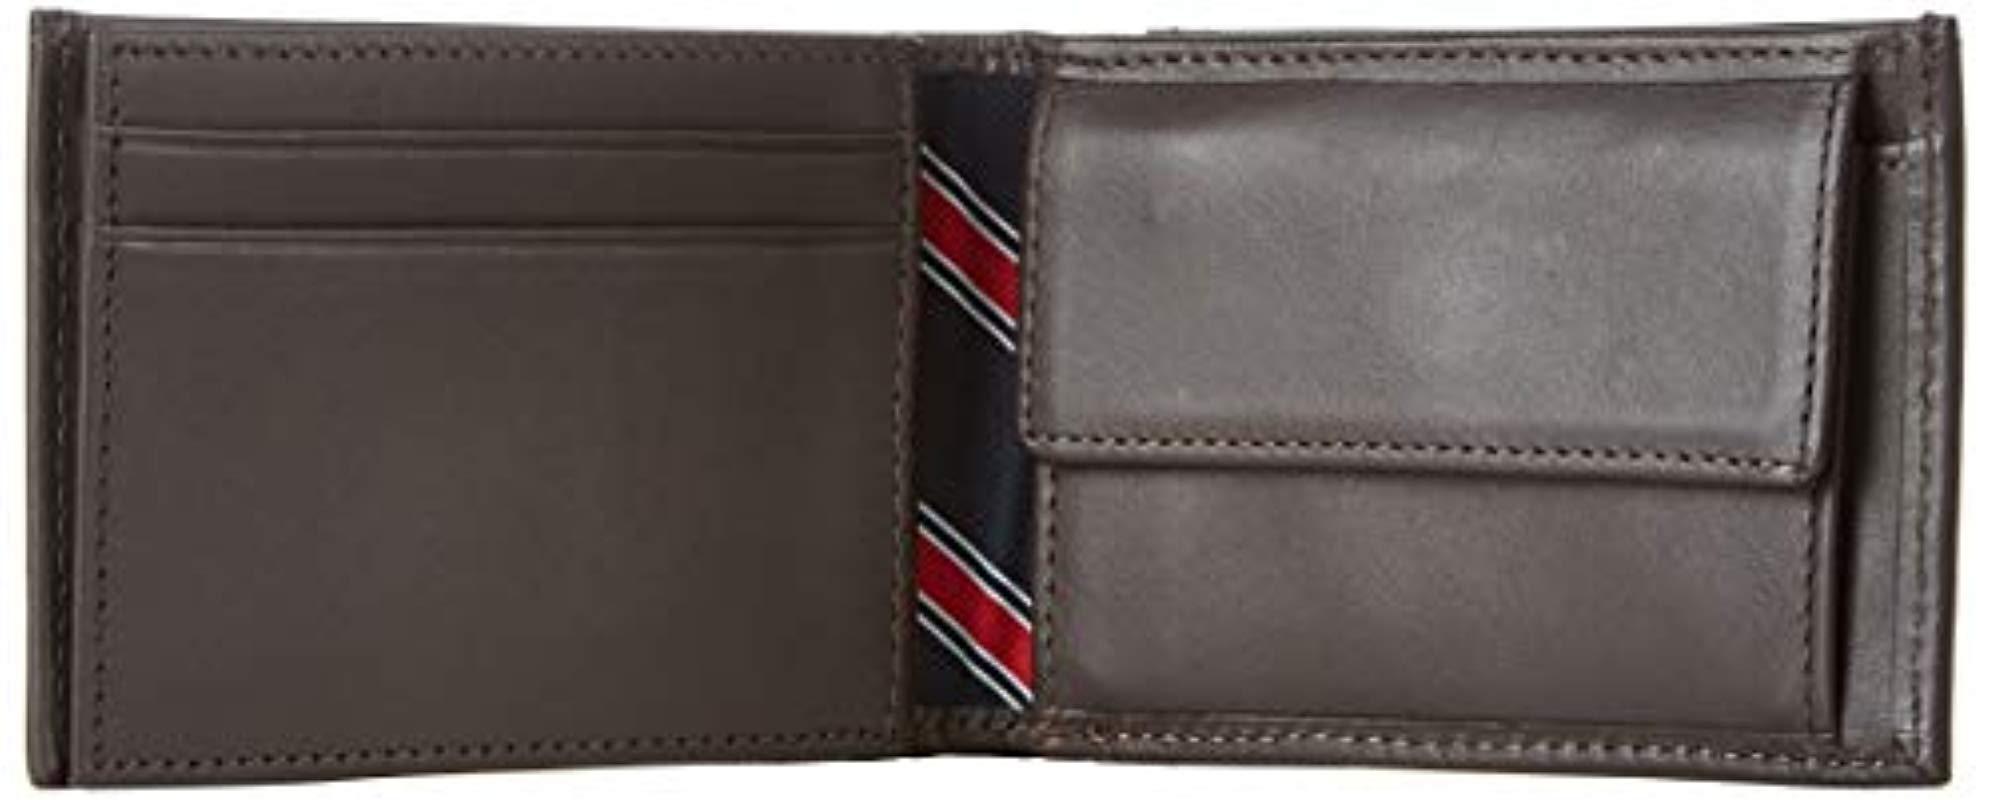 B x H x T Tommy Hilfiger Johnson CC Flap and Coin Pocket 13x10x2 cm Cartera Hombre^Mujer